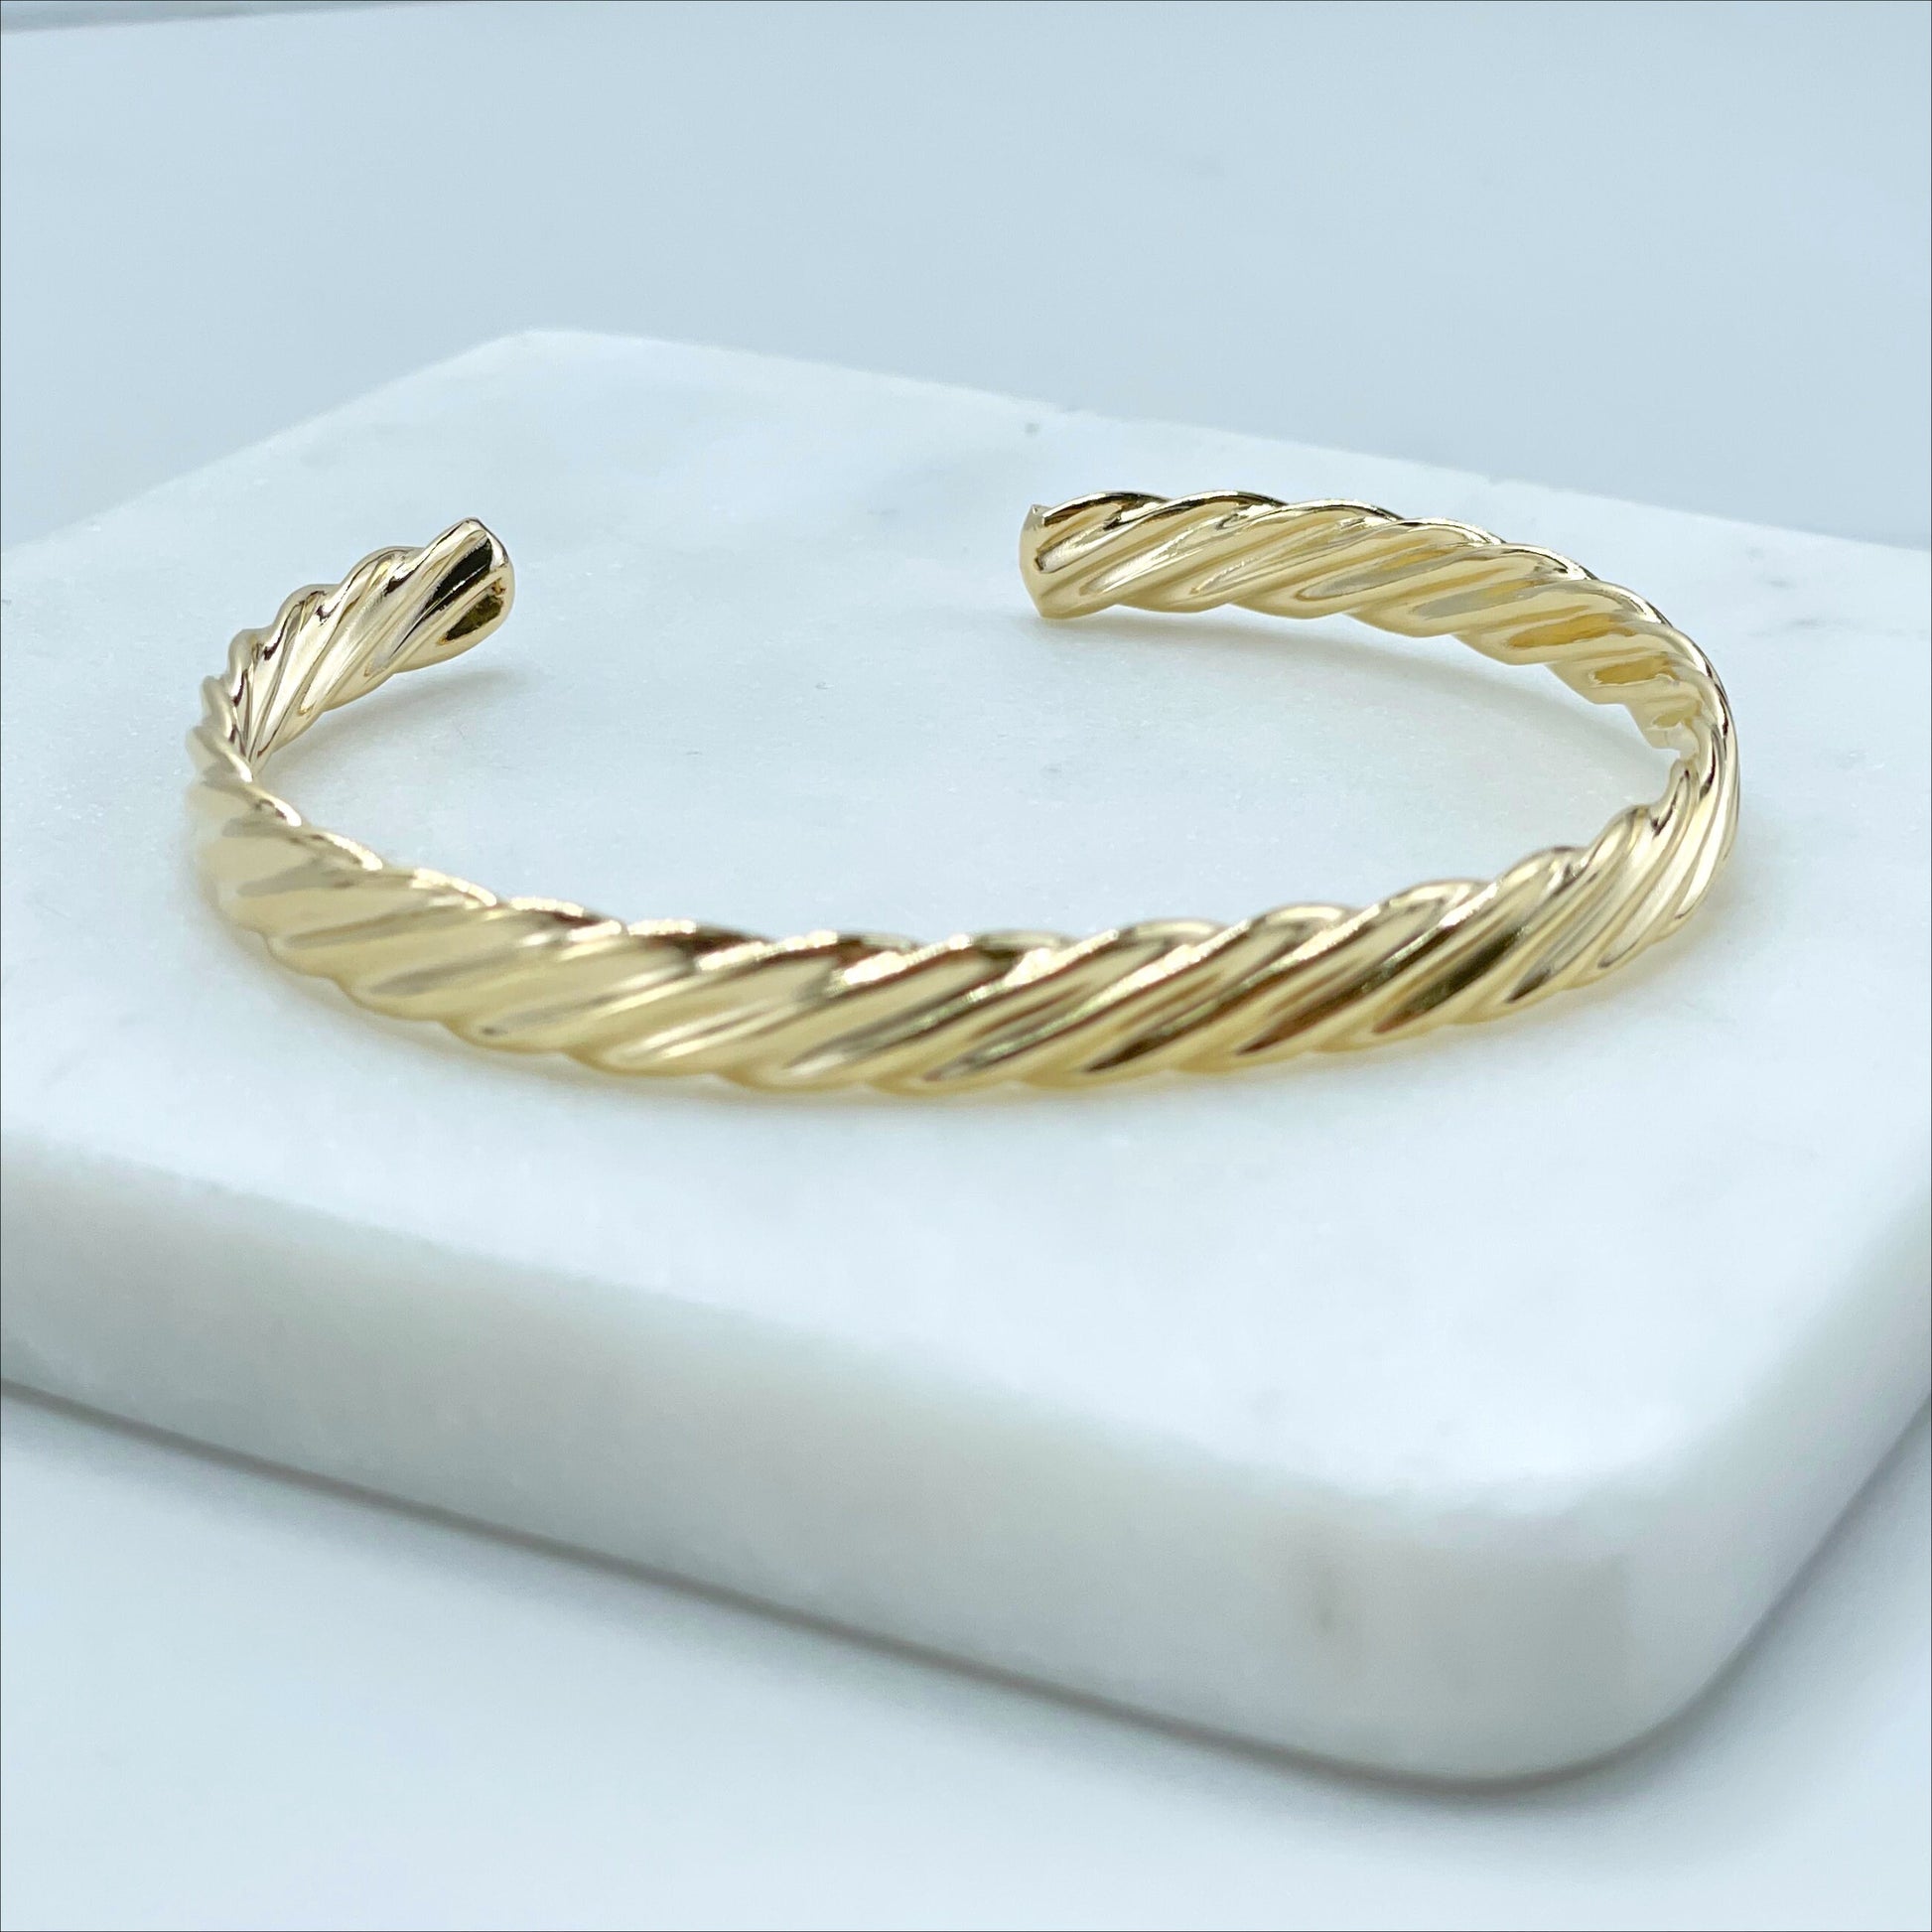 18k Silver Filled or Gold Filled,Texturized Cuff Bracelet, Wholesale Jewelry Making Supplies